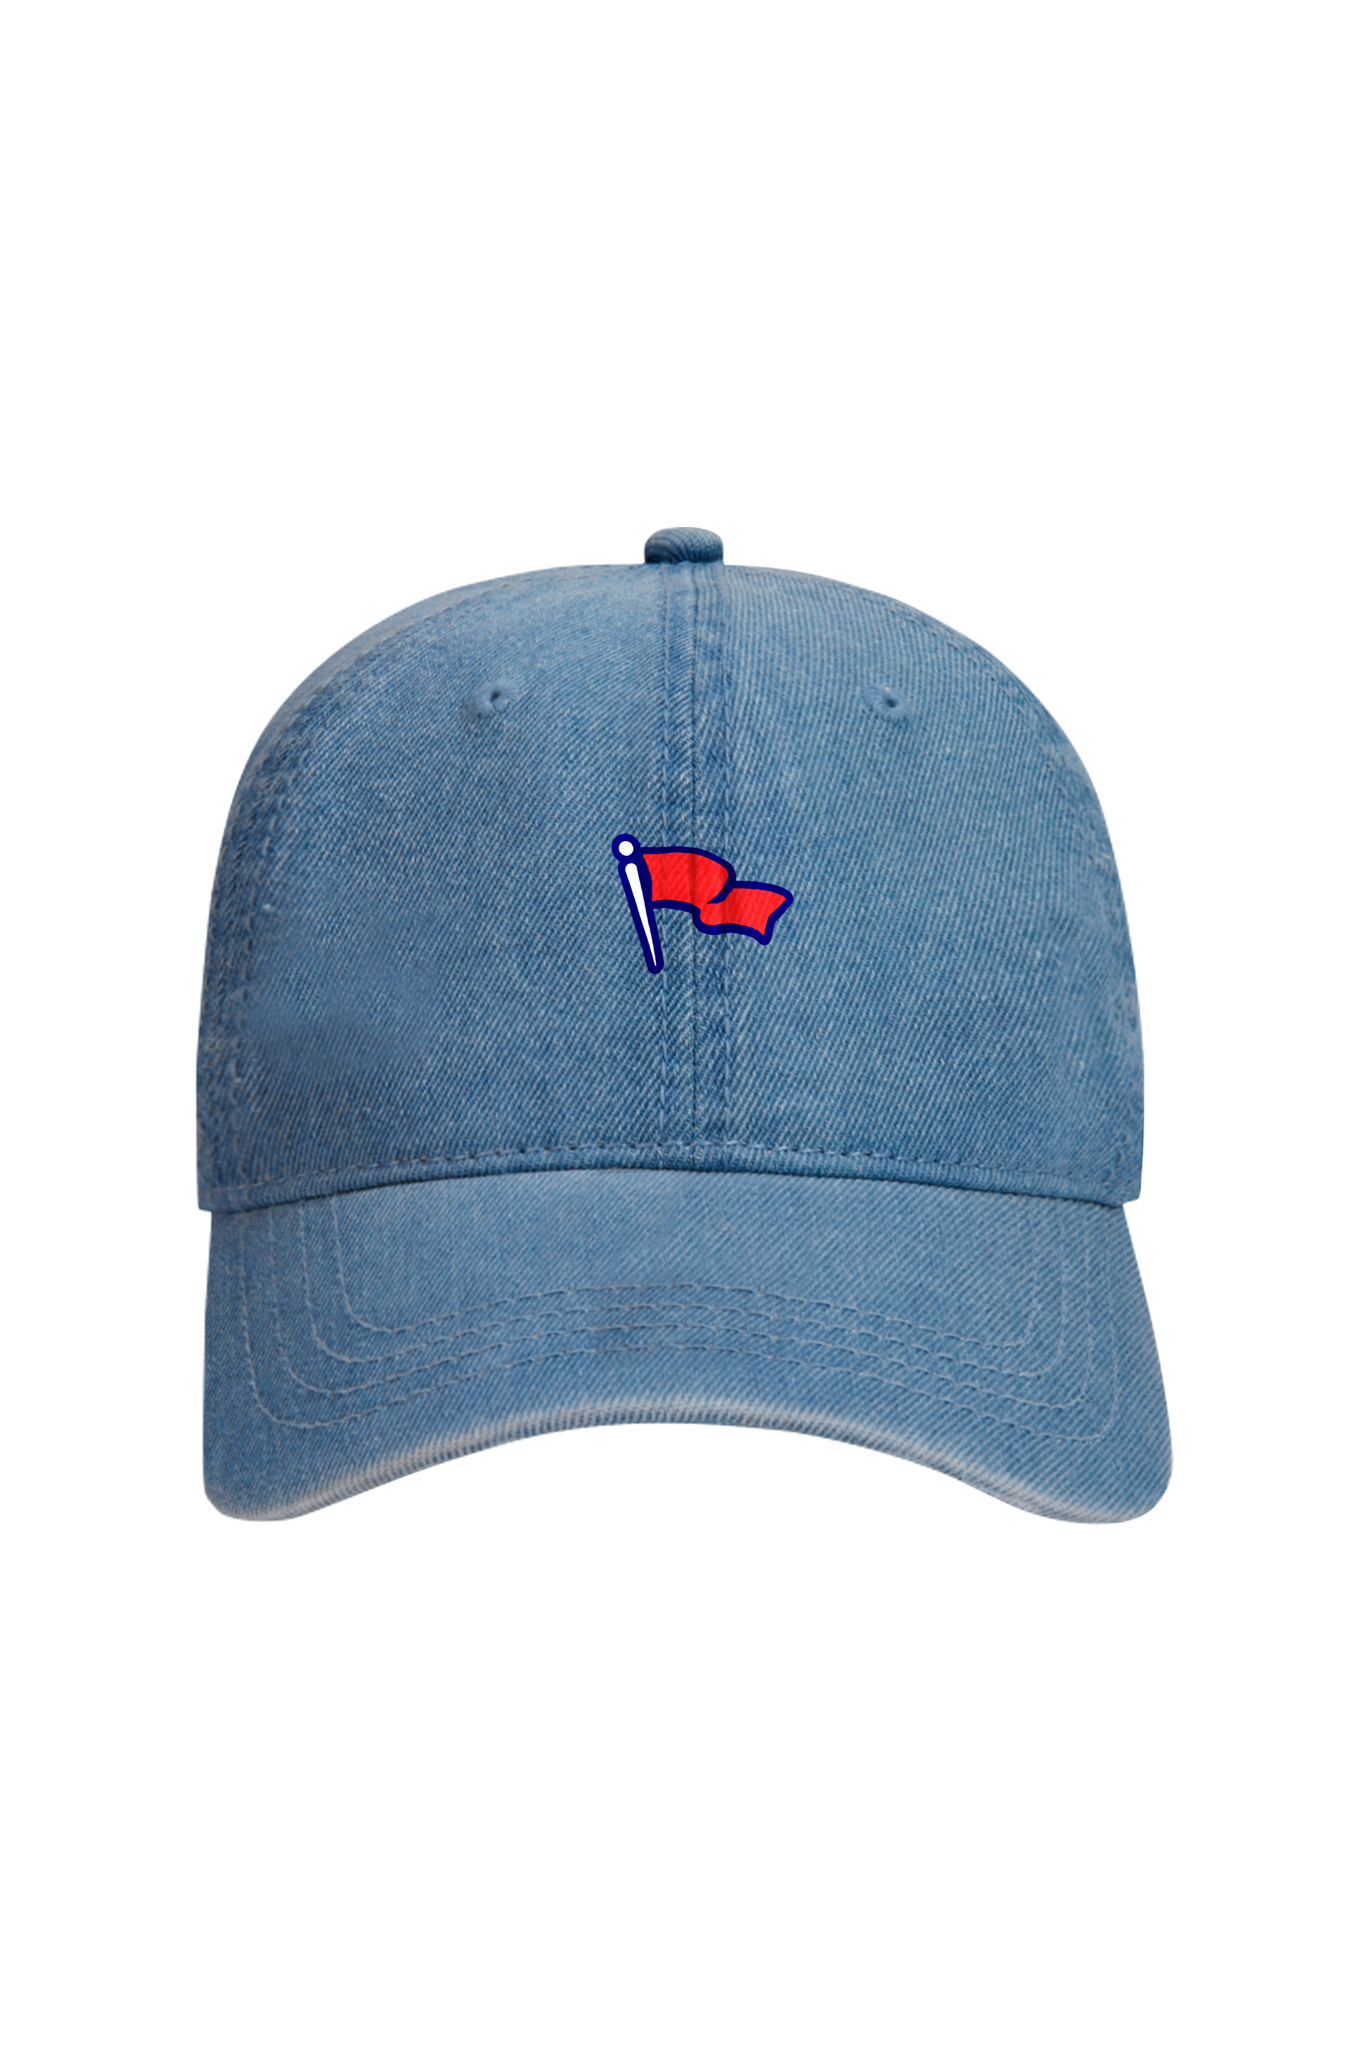 A blue denim-textured cap with a small red and blue flag emblem on the front panel.